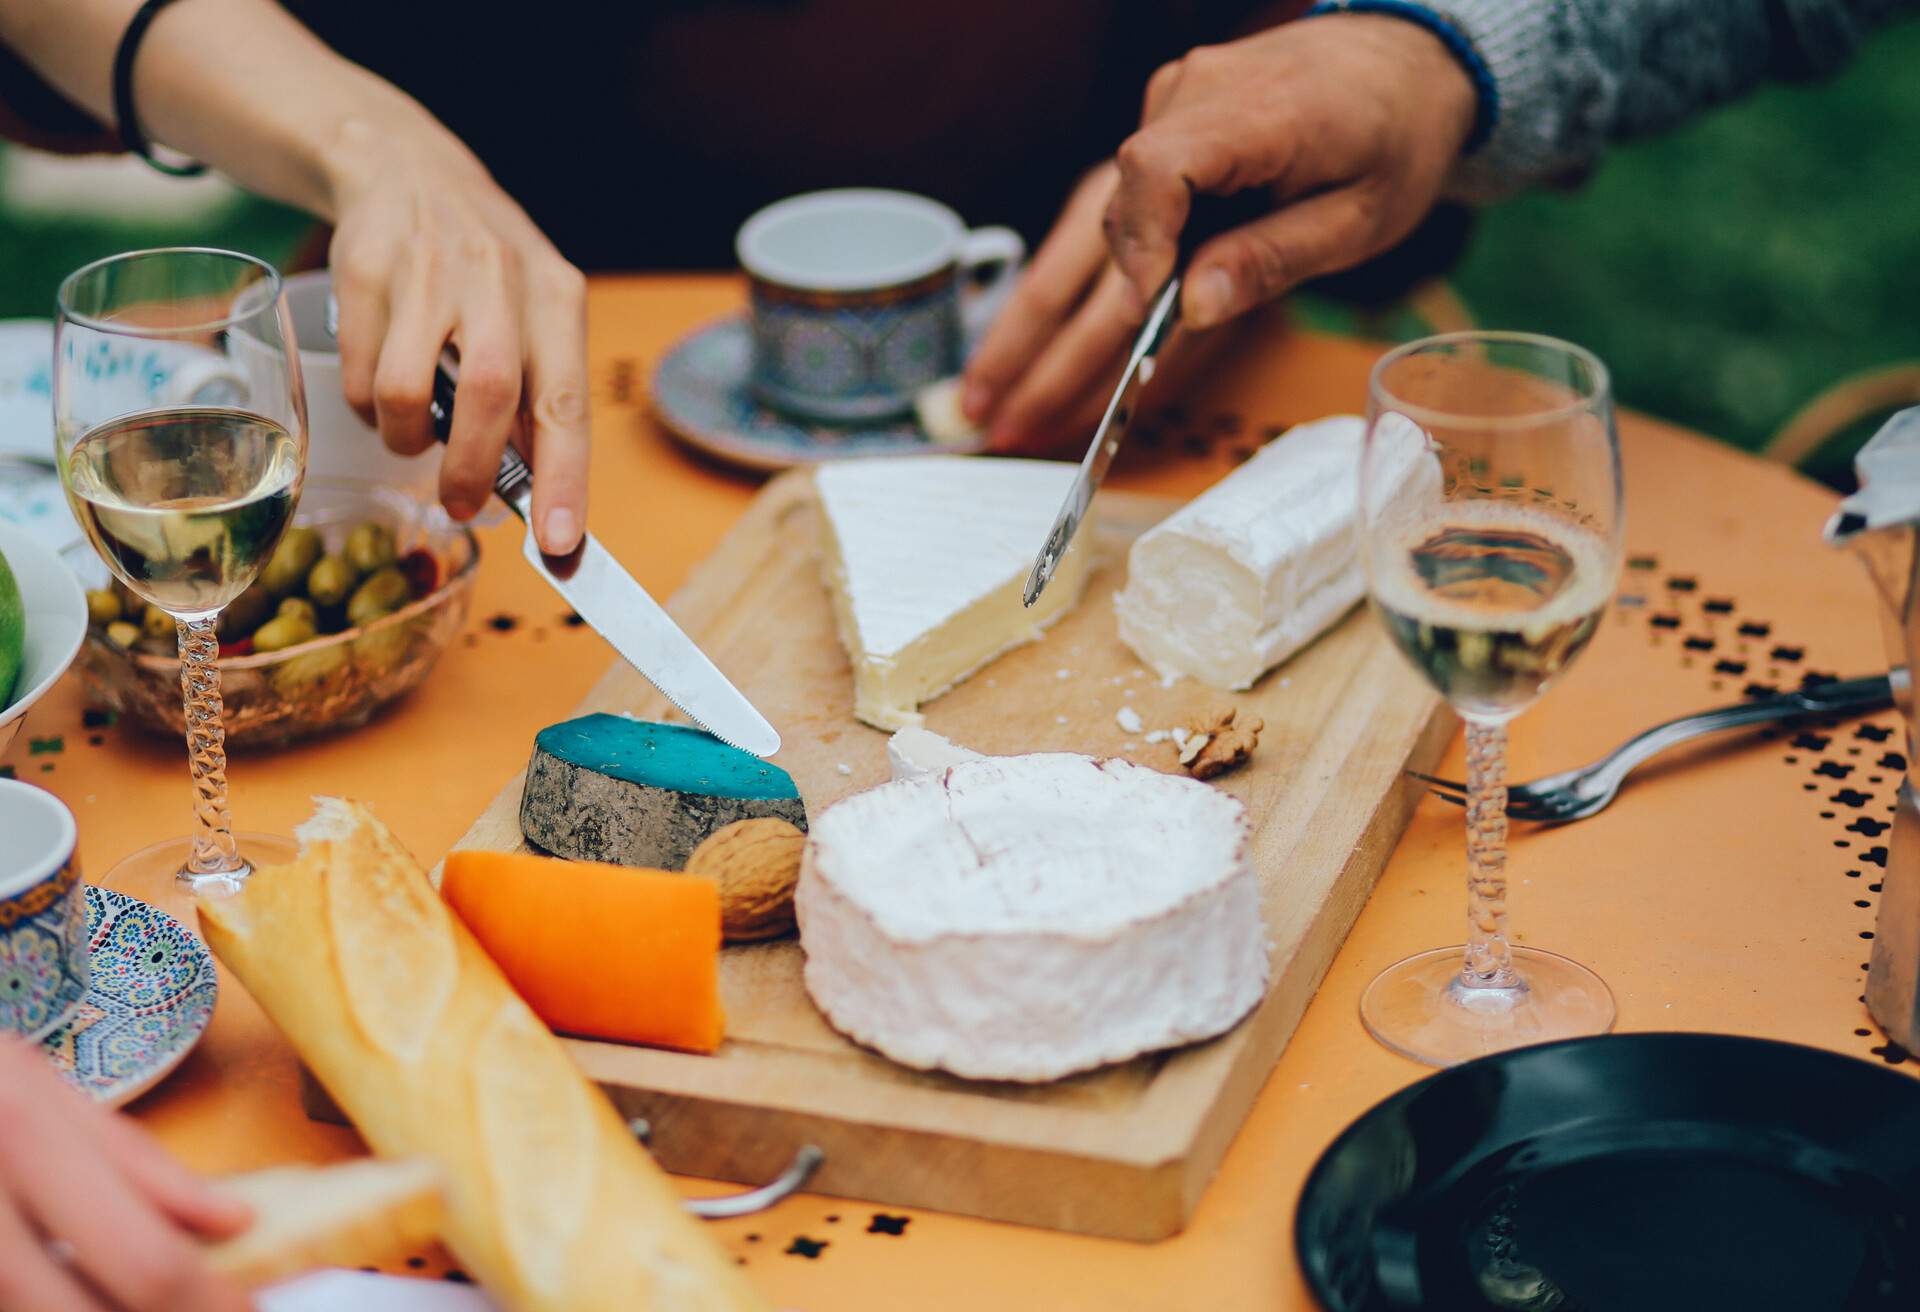 People share a table full of different cheeses, wines, baguette bread, fruits and vegetables.